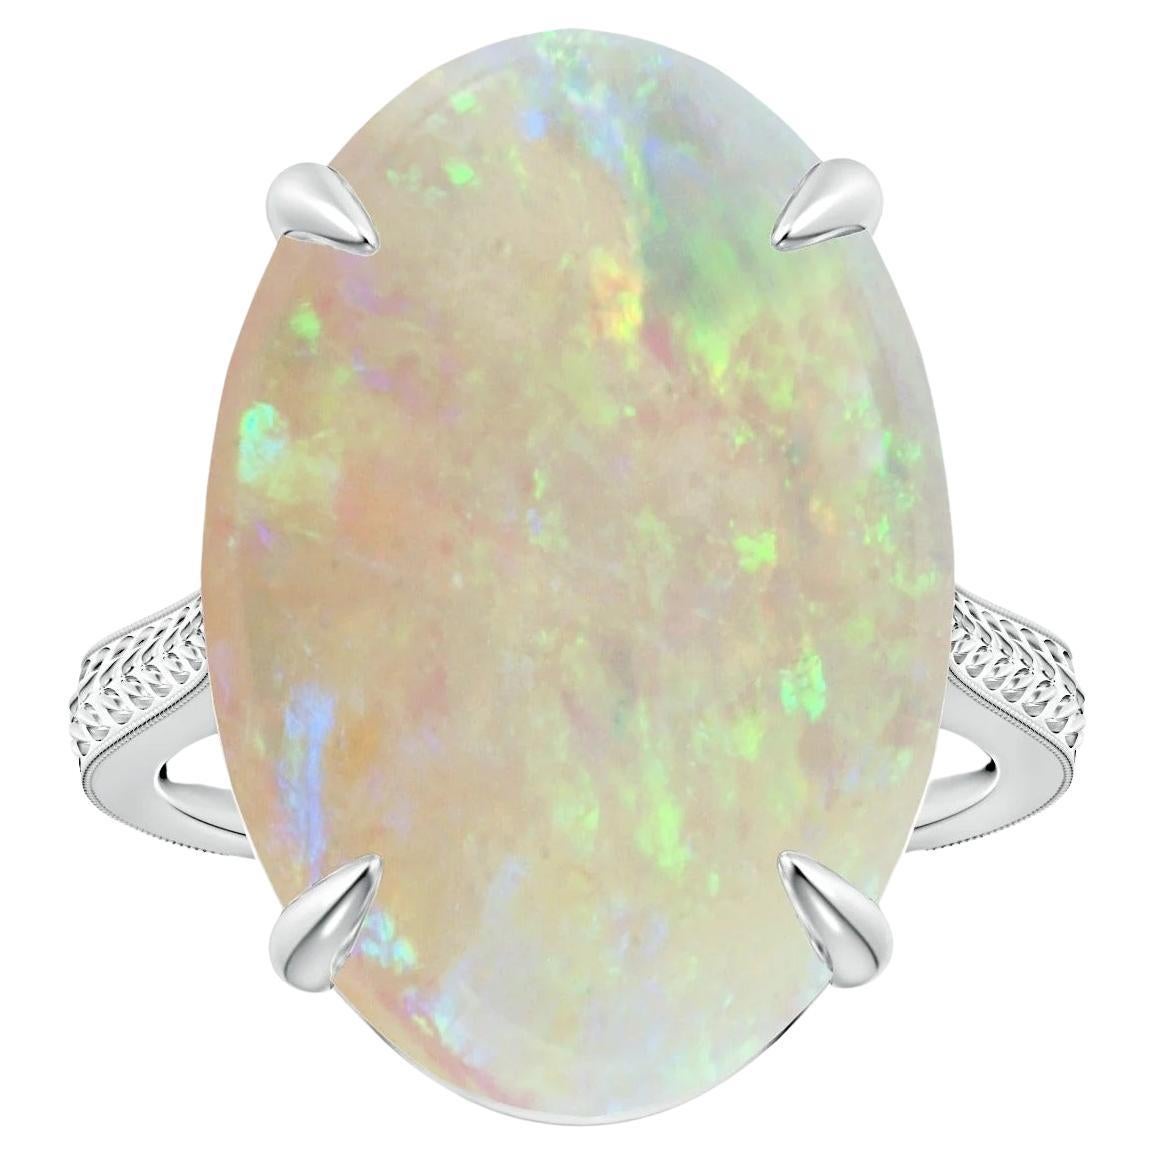 ANGARA GIA Certified Solitaire Opal Ring in White Gold with Leaf Motifs